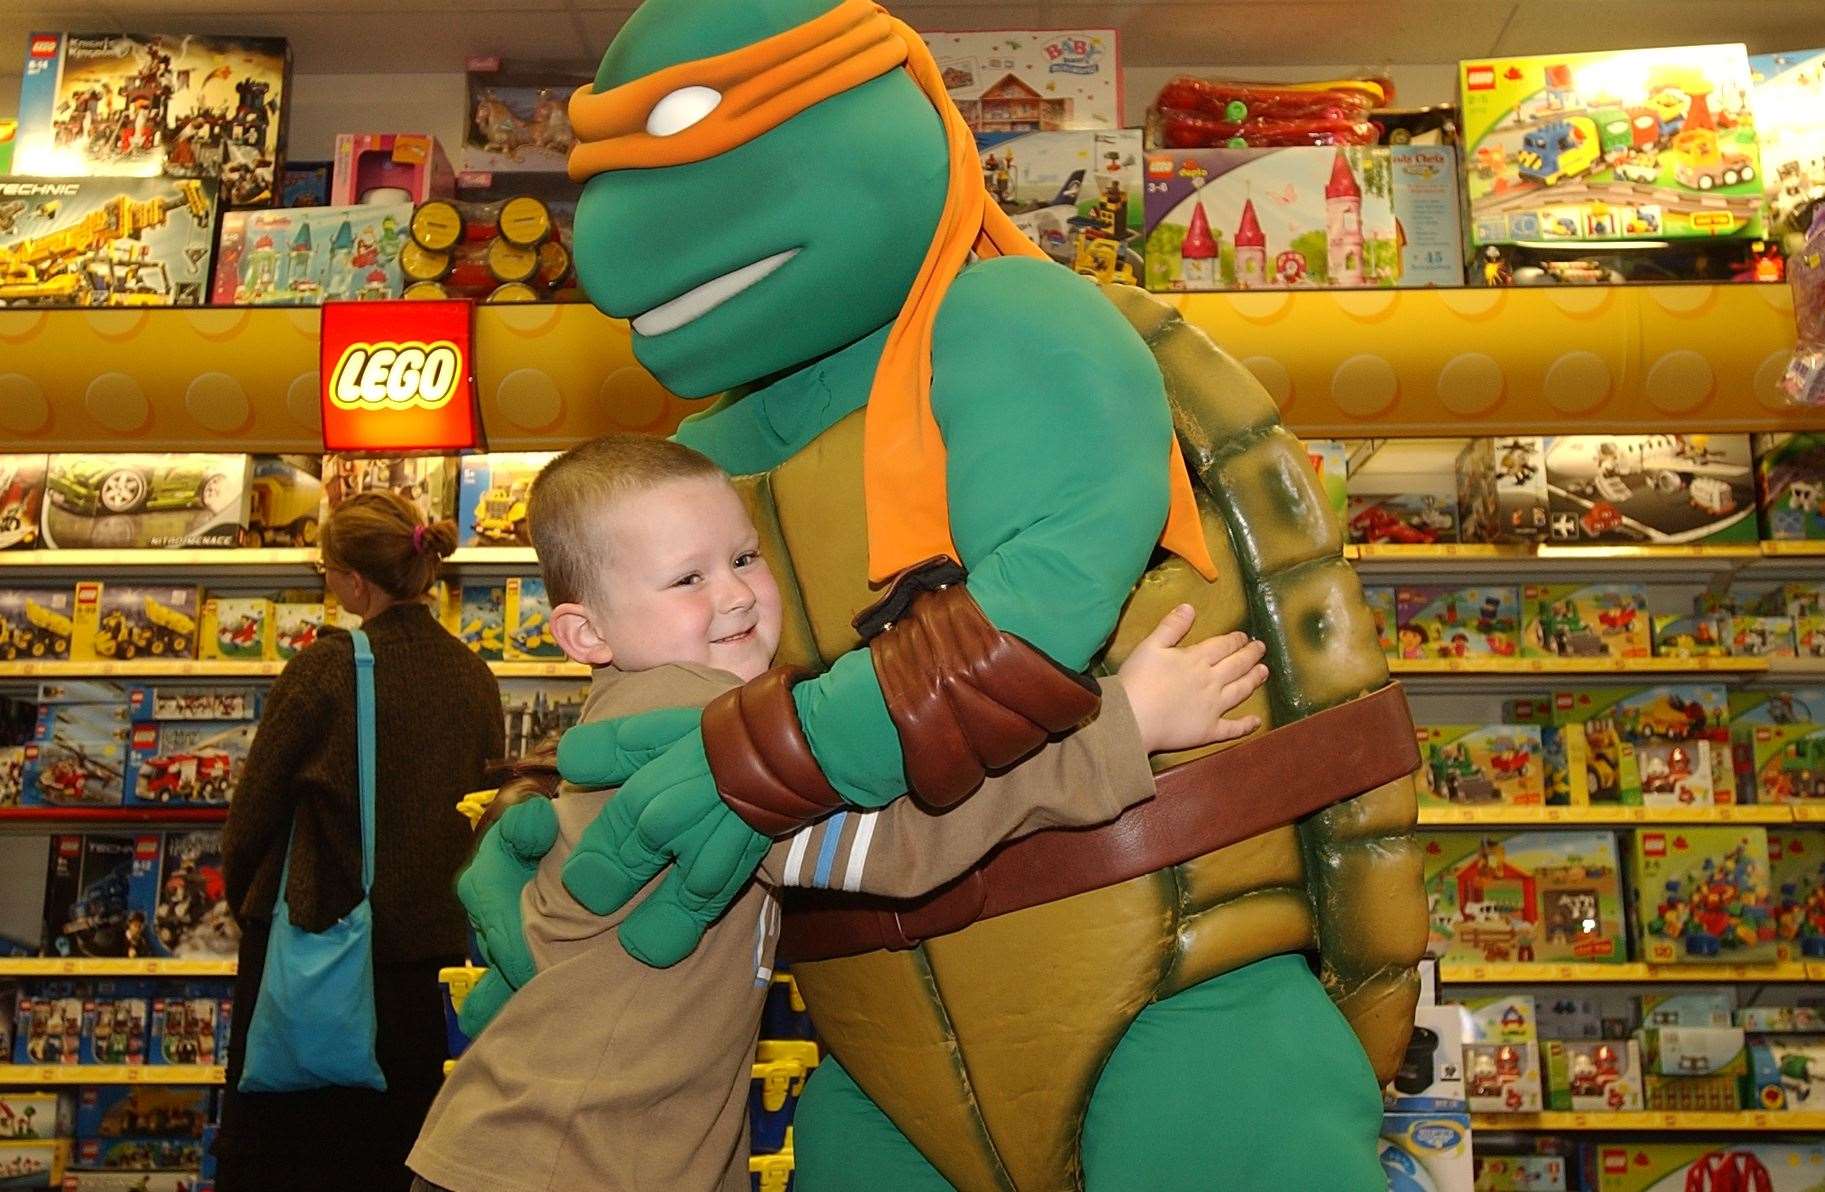 Teenage Mutant Ninja Turtles frequently appear in children’s wish lists